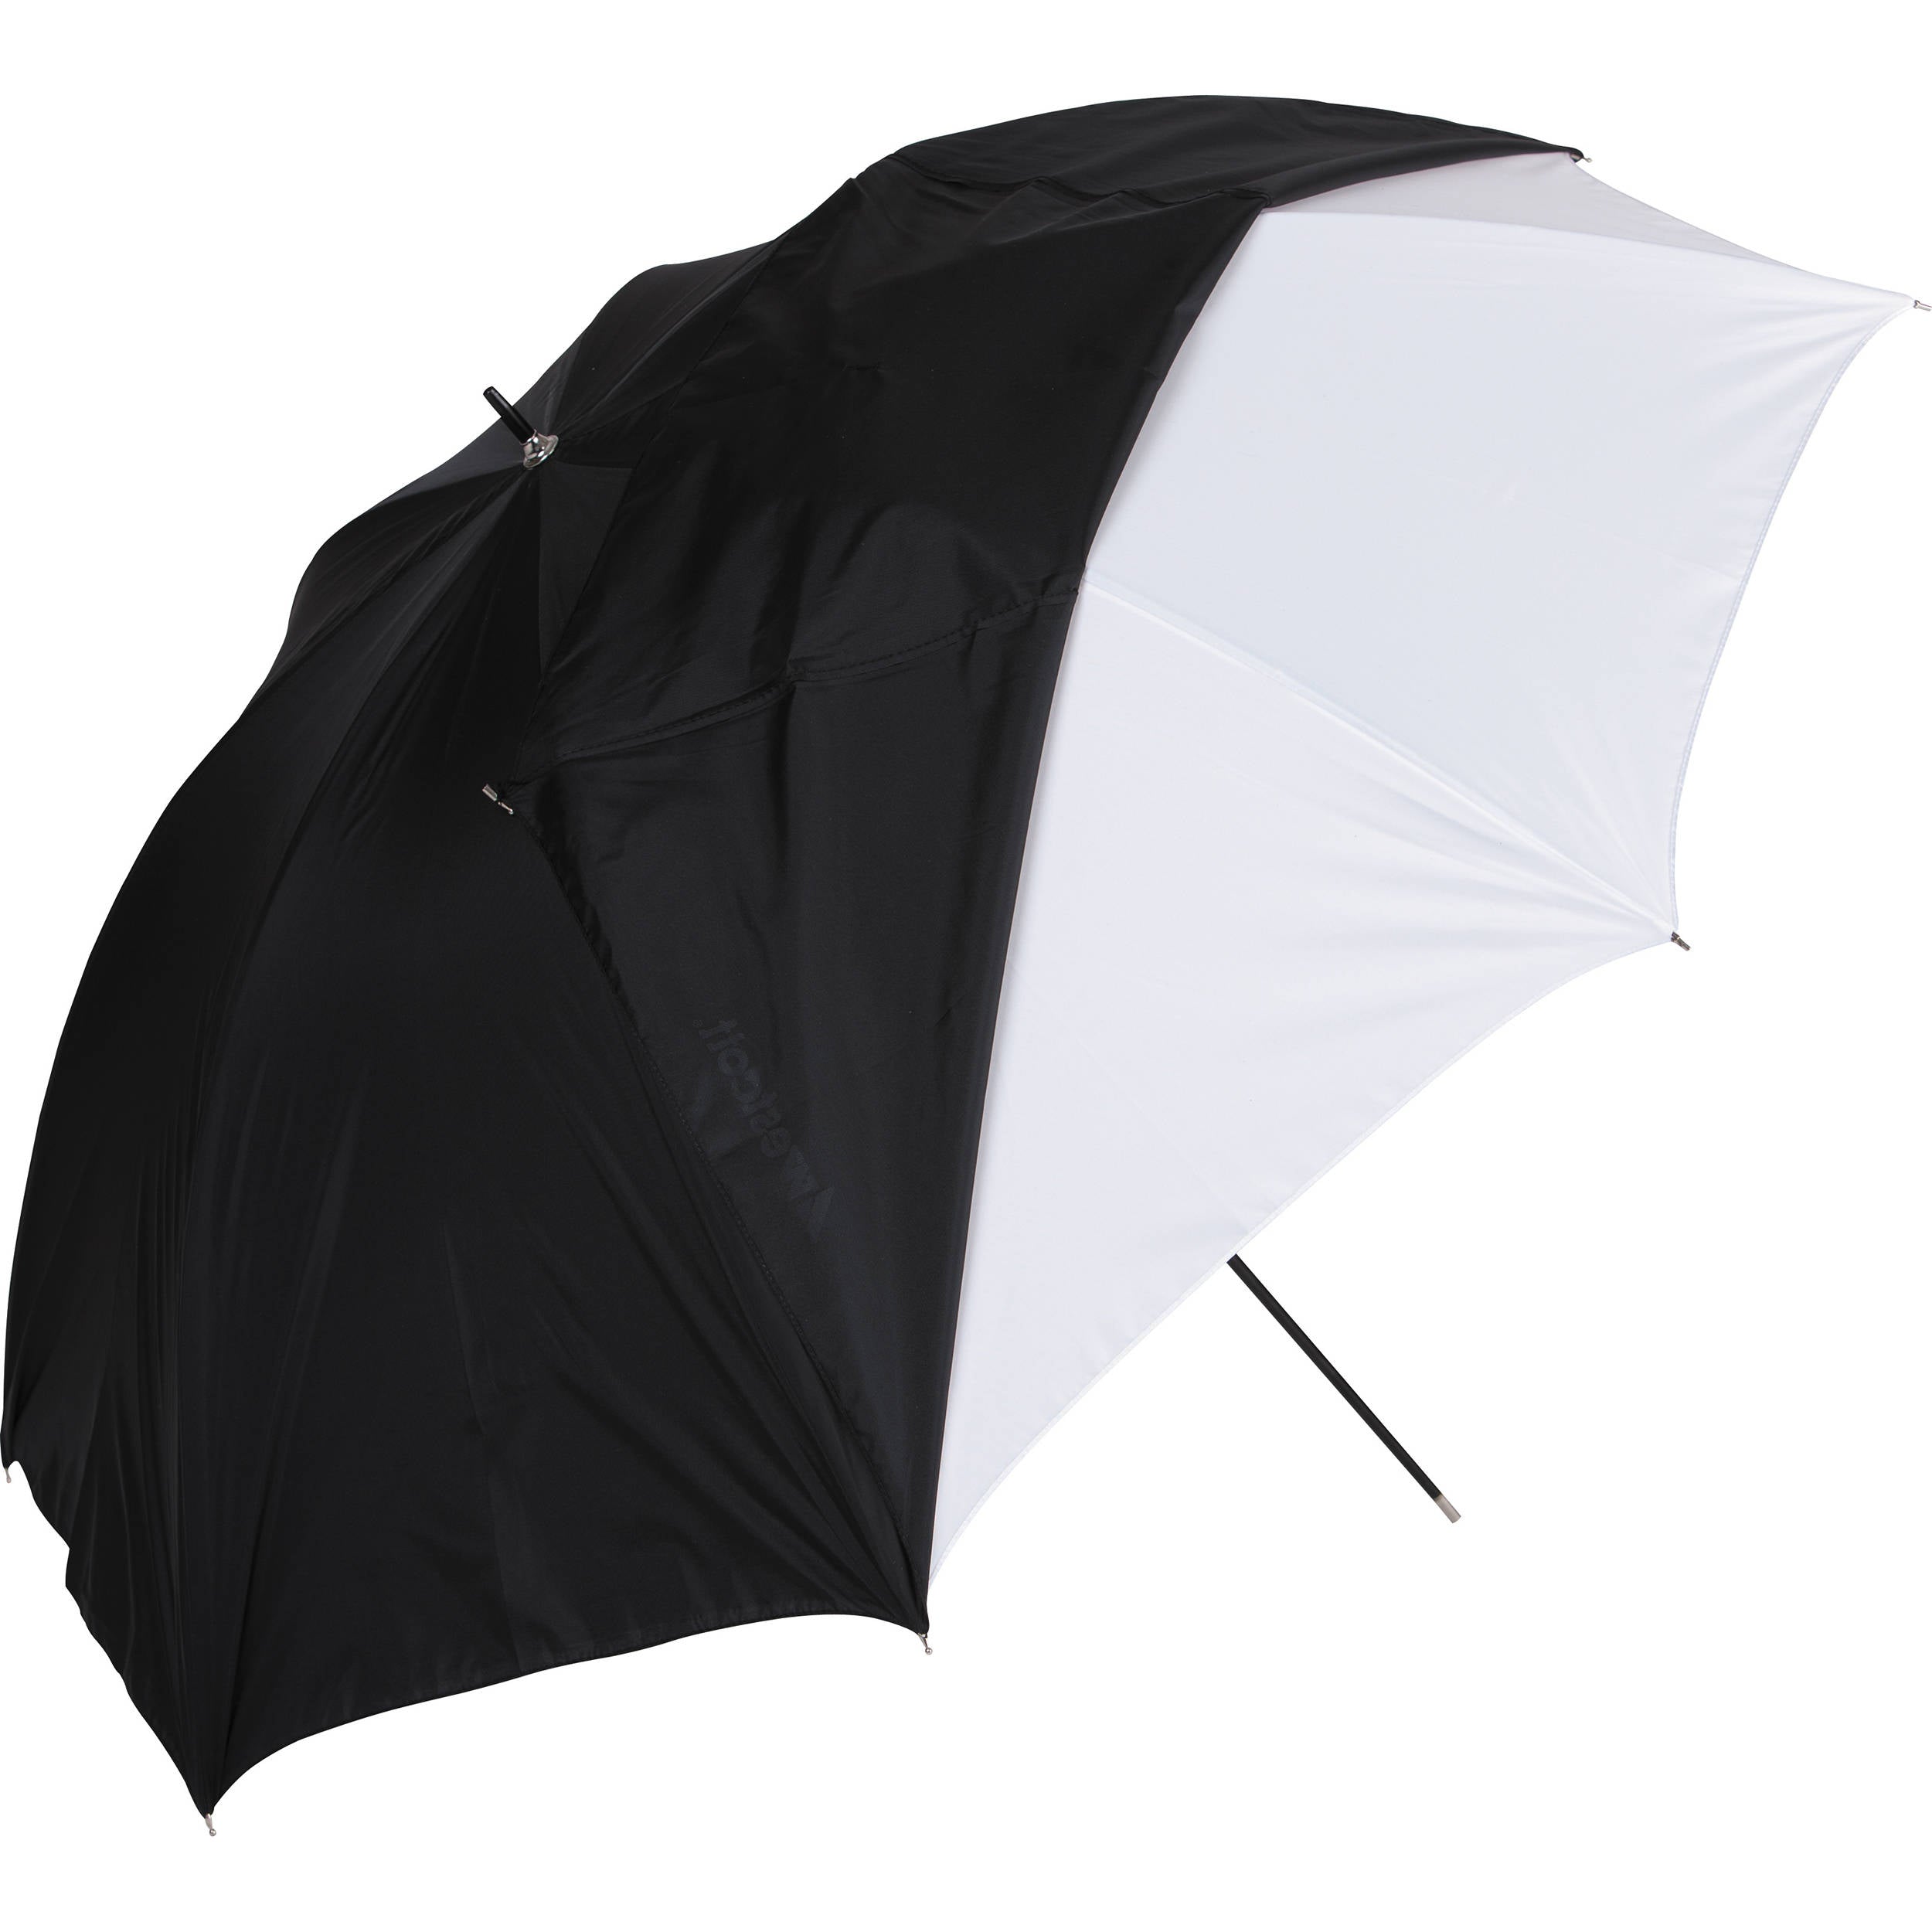 Westcott Convertible Umbrella - Optical White Satin with Removable Black Cover (32")